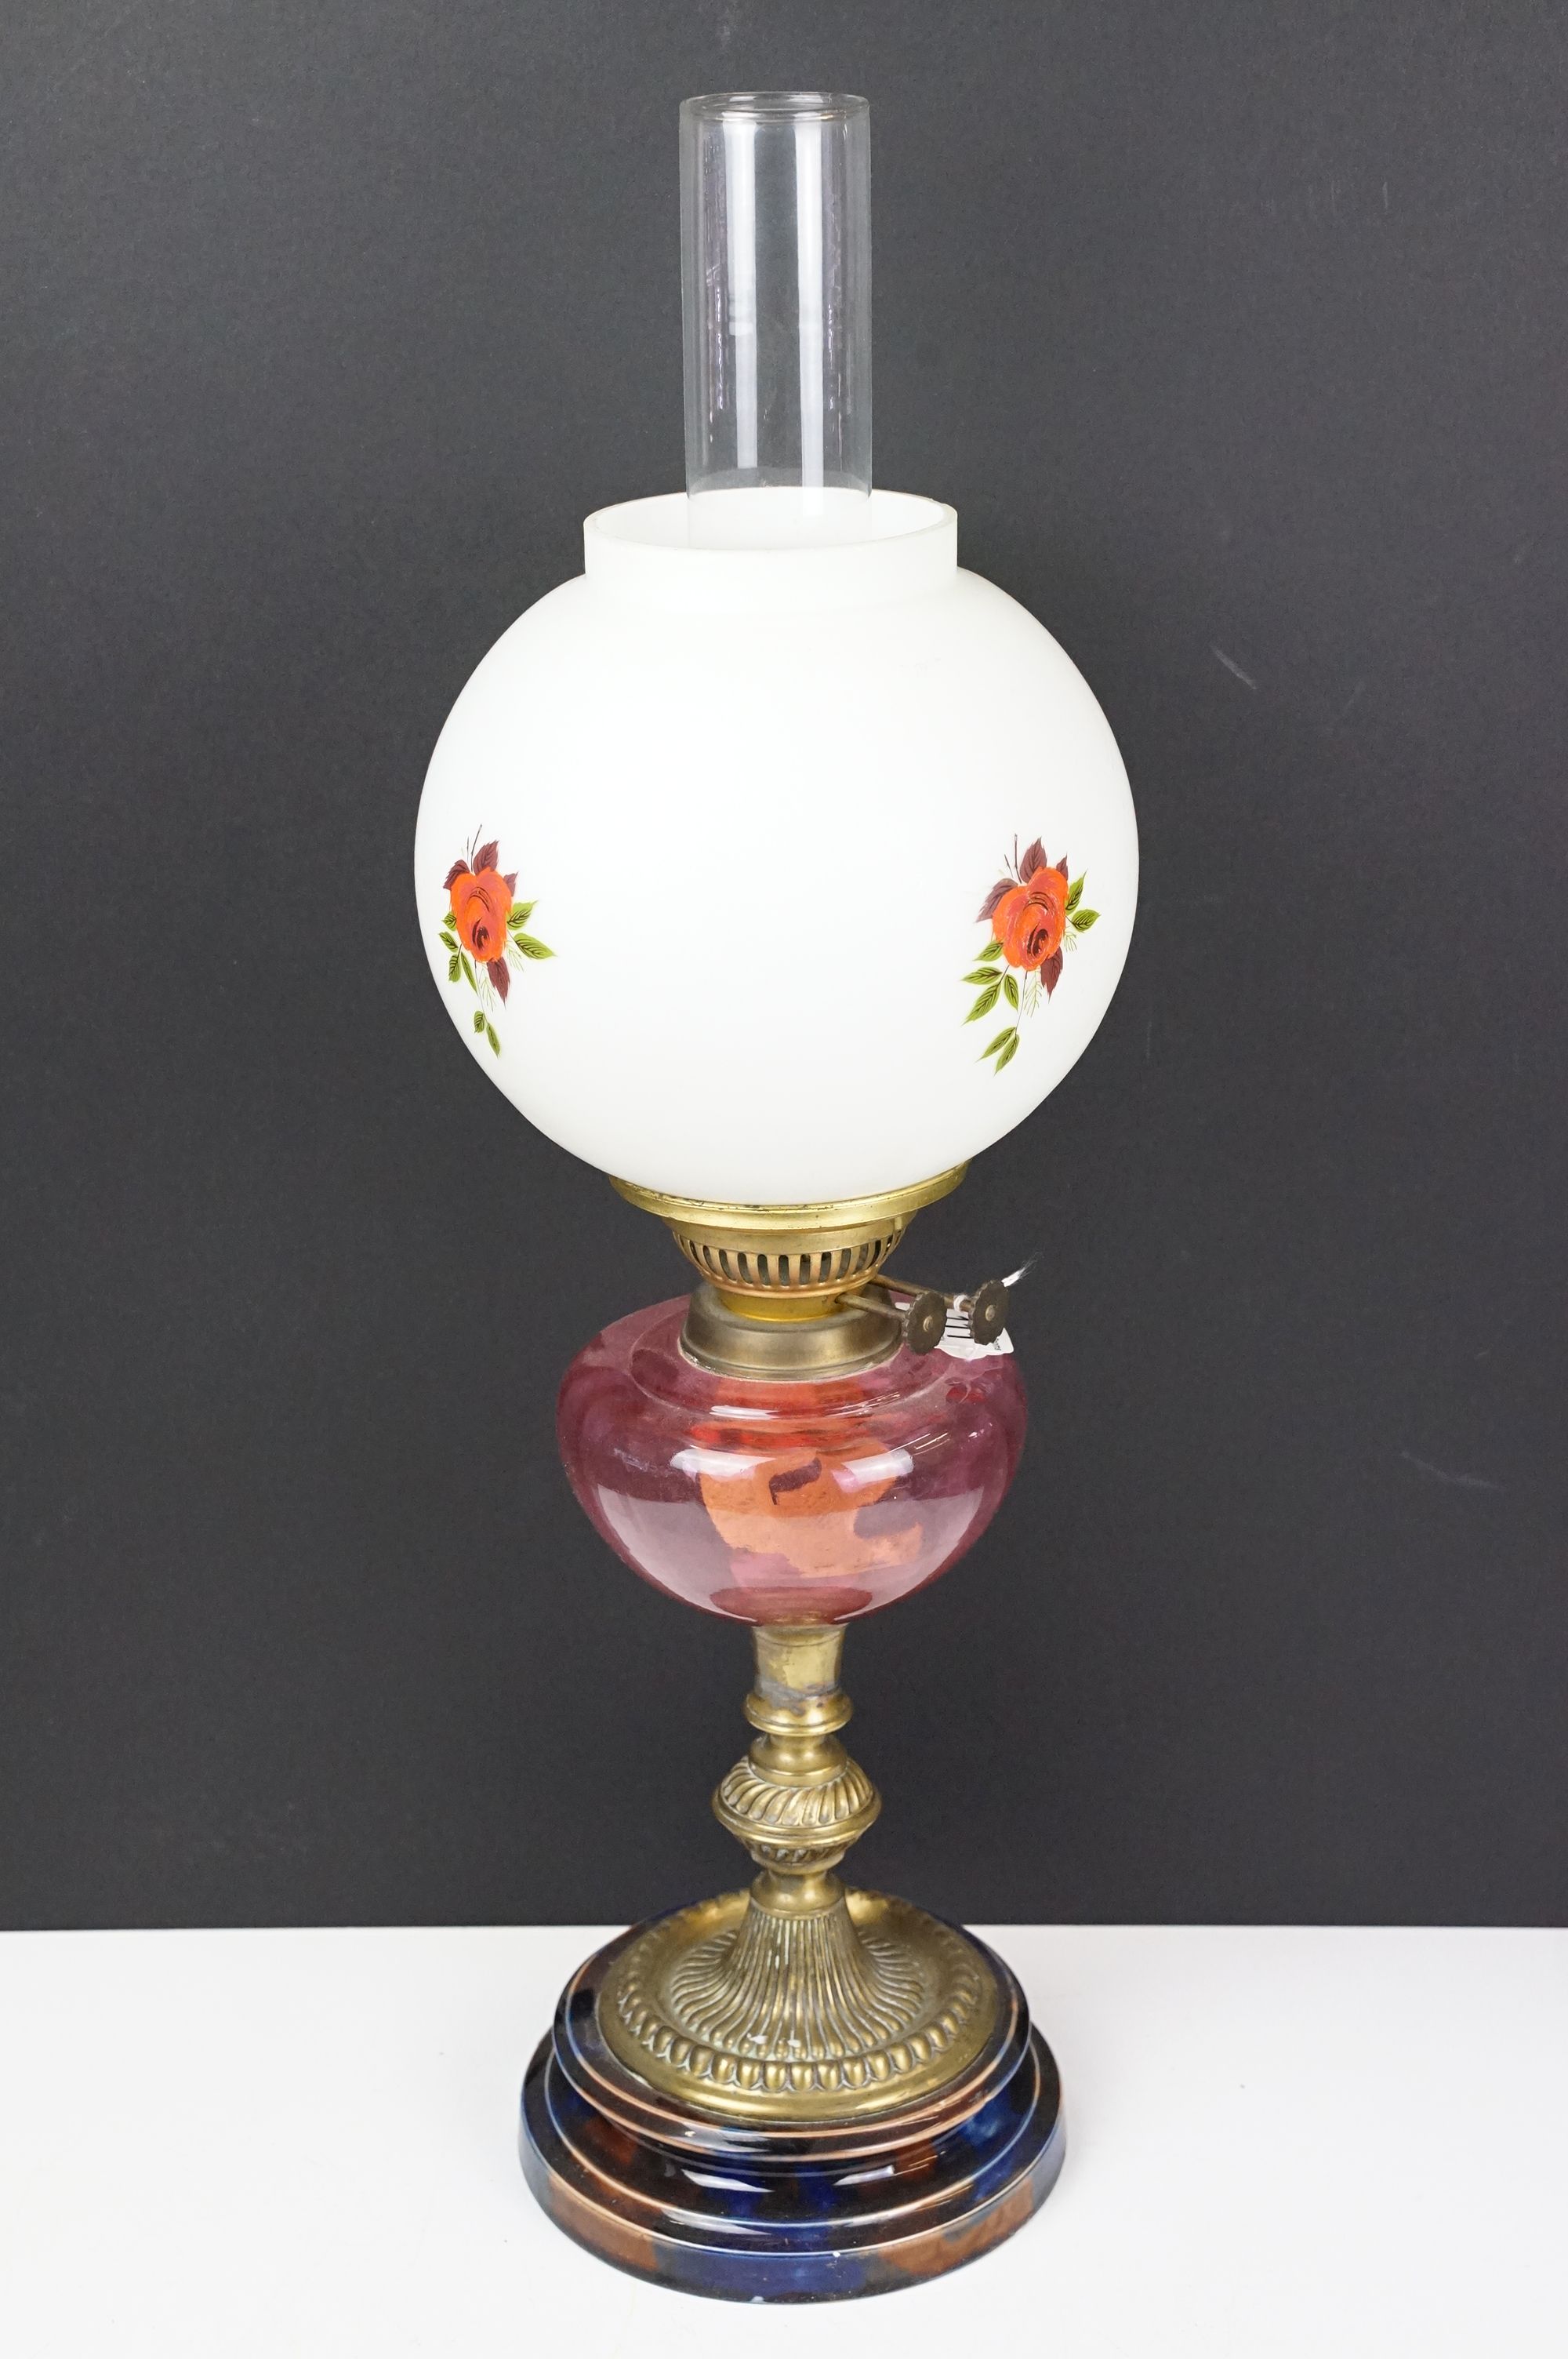 Early 20th century brass oil lamp, the white glass shade with floral detail, with cranberry glass